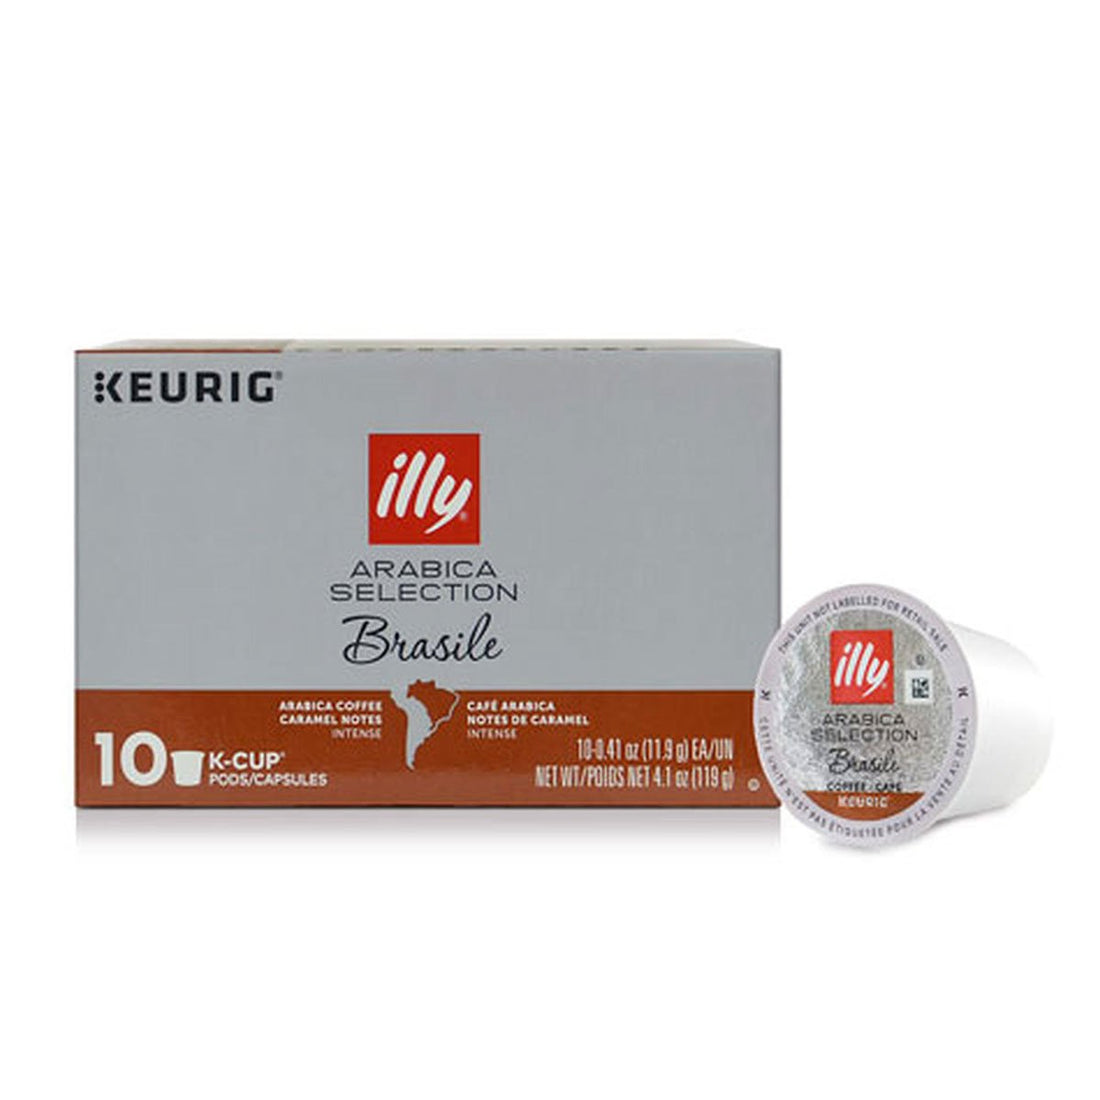 illy Arabica Selection Brasile K-Cup® Packs